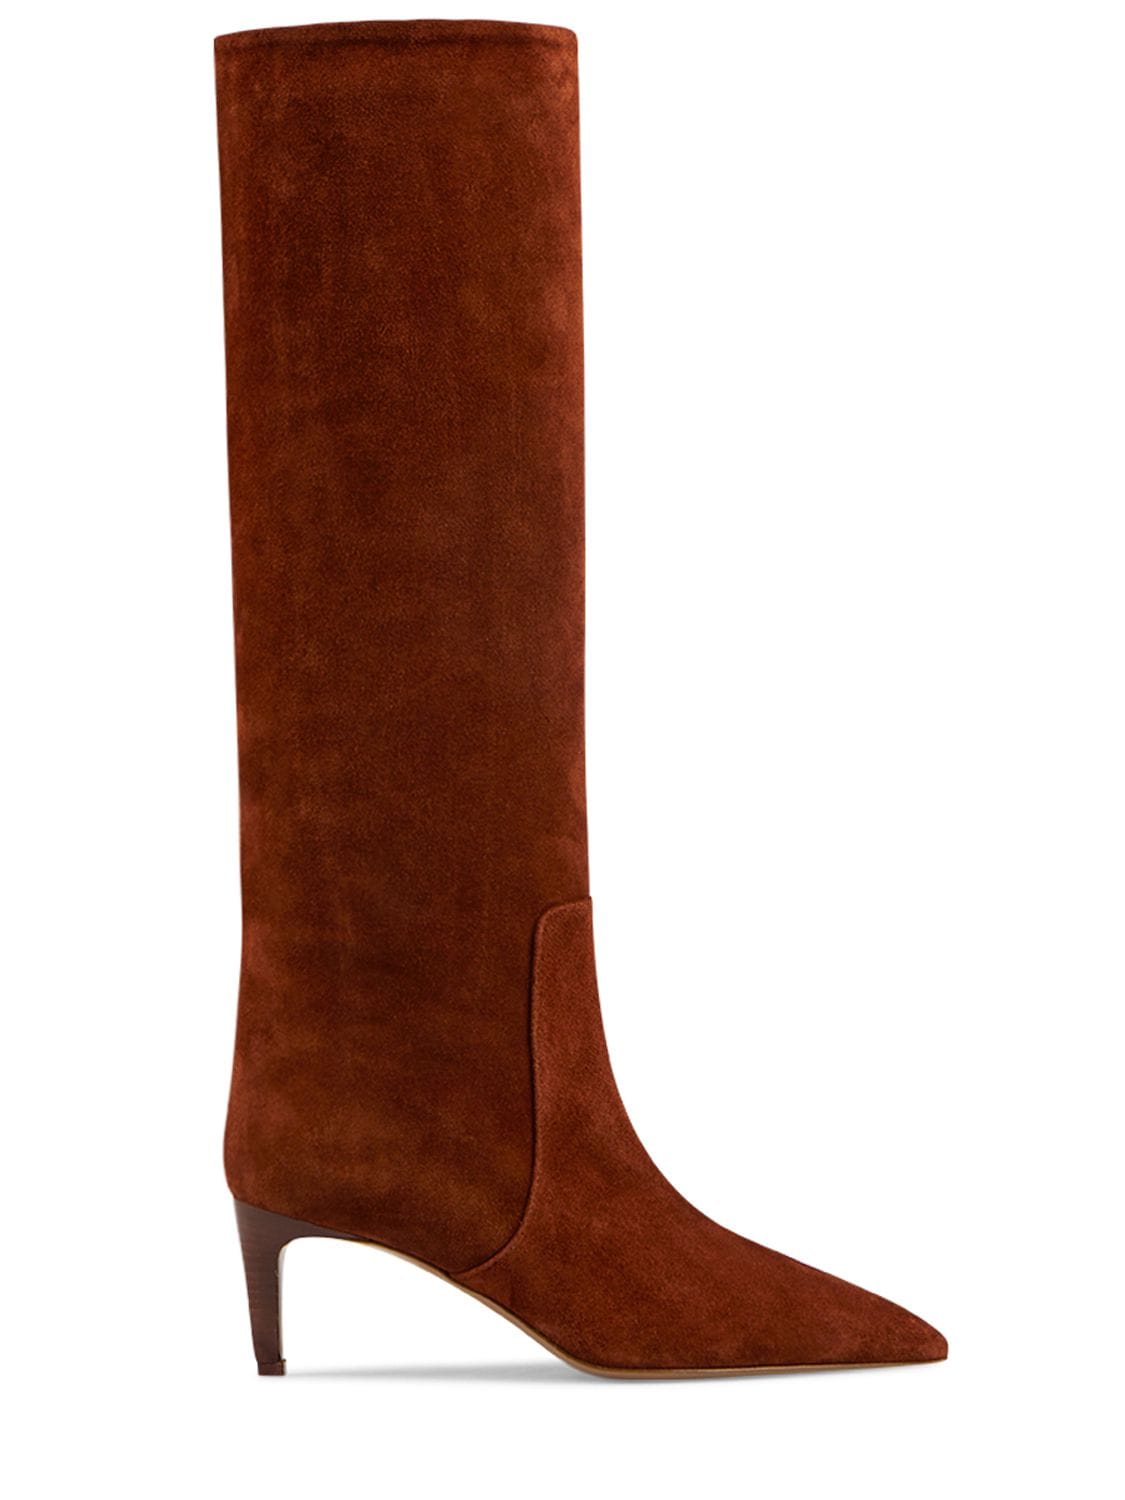 Paris Texas 60mm Stiletto Leather Tall Boots In Rust